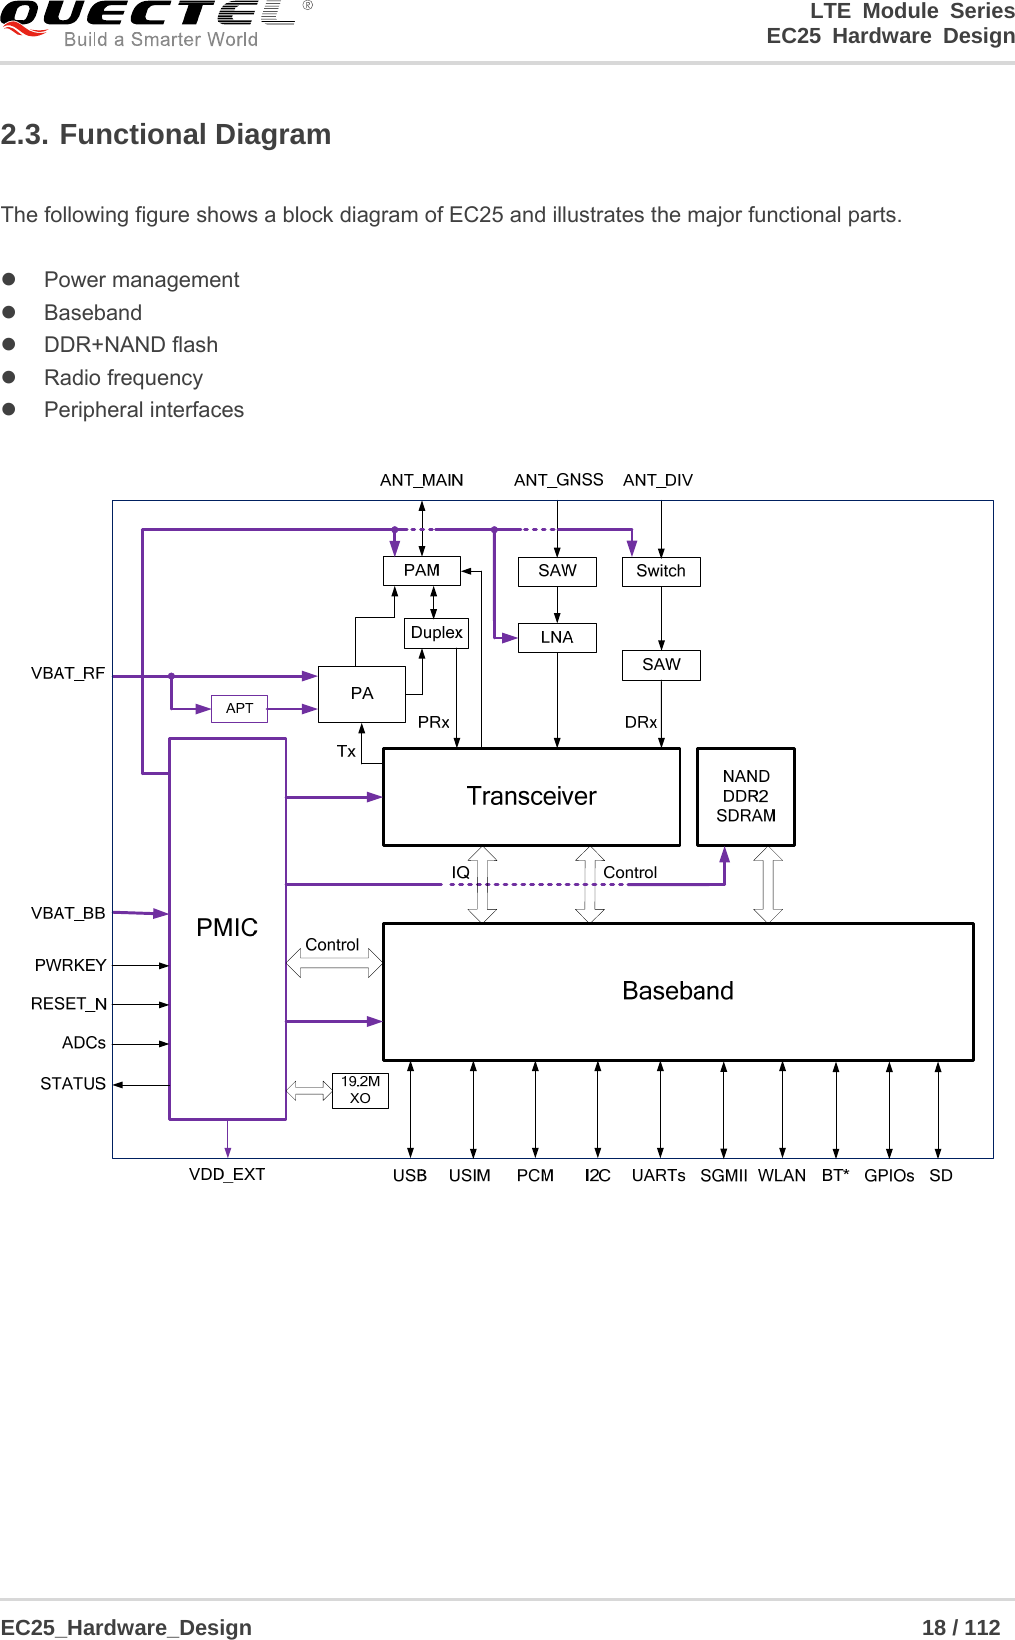 LTE Module Series                                                  EC25 Hardware Design  EC25_Hardware_Design                                                             18 / 112    2.3. Functional Diagram  The following figure shows a block diagram of EC25 and illustrates the major functional parts.     Power management  Baseband  DDR+NAND flash  Radio frequency   Peripheral interfaces  